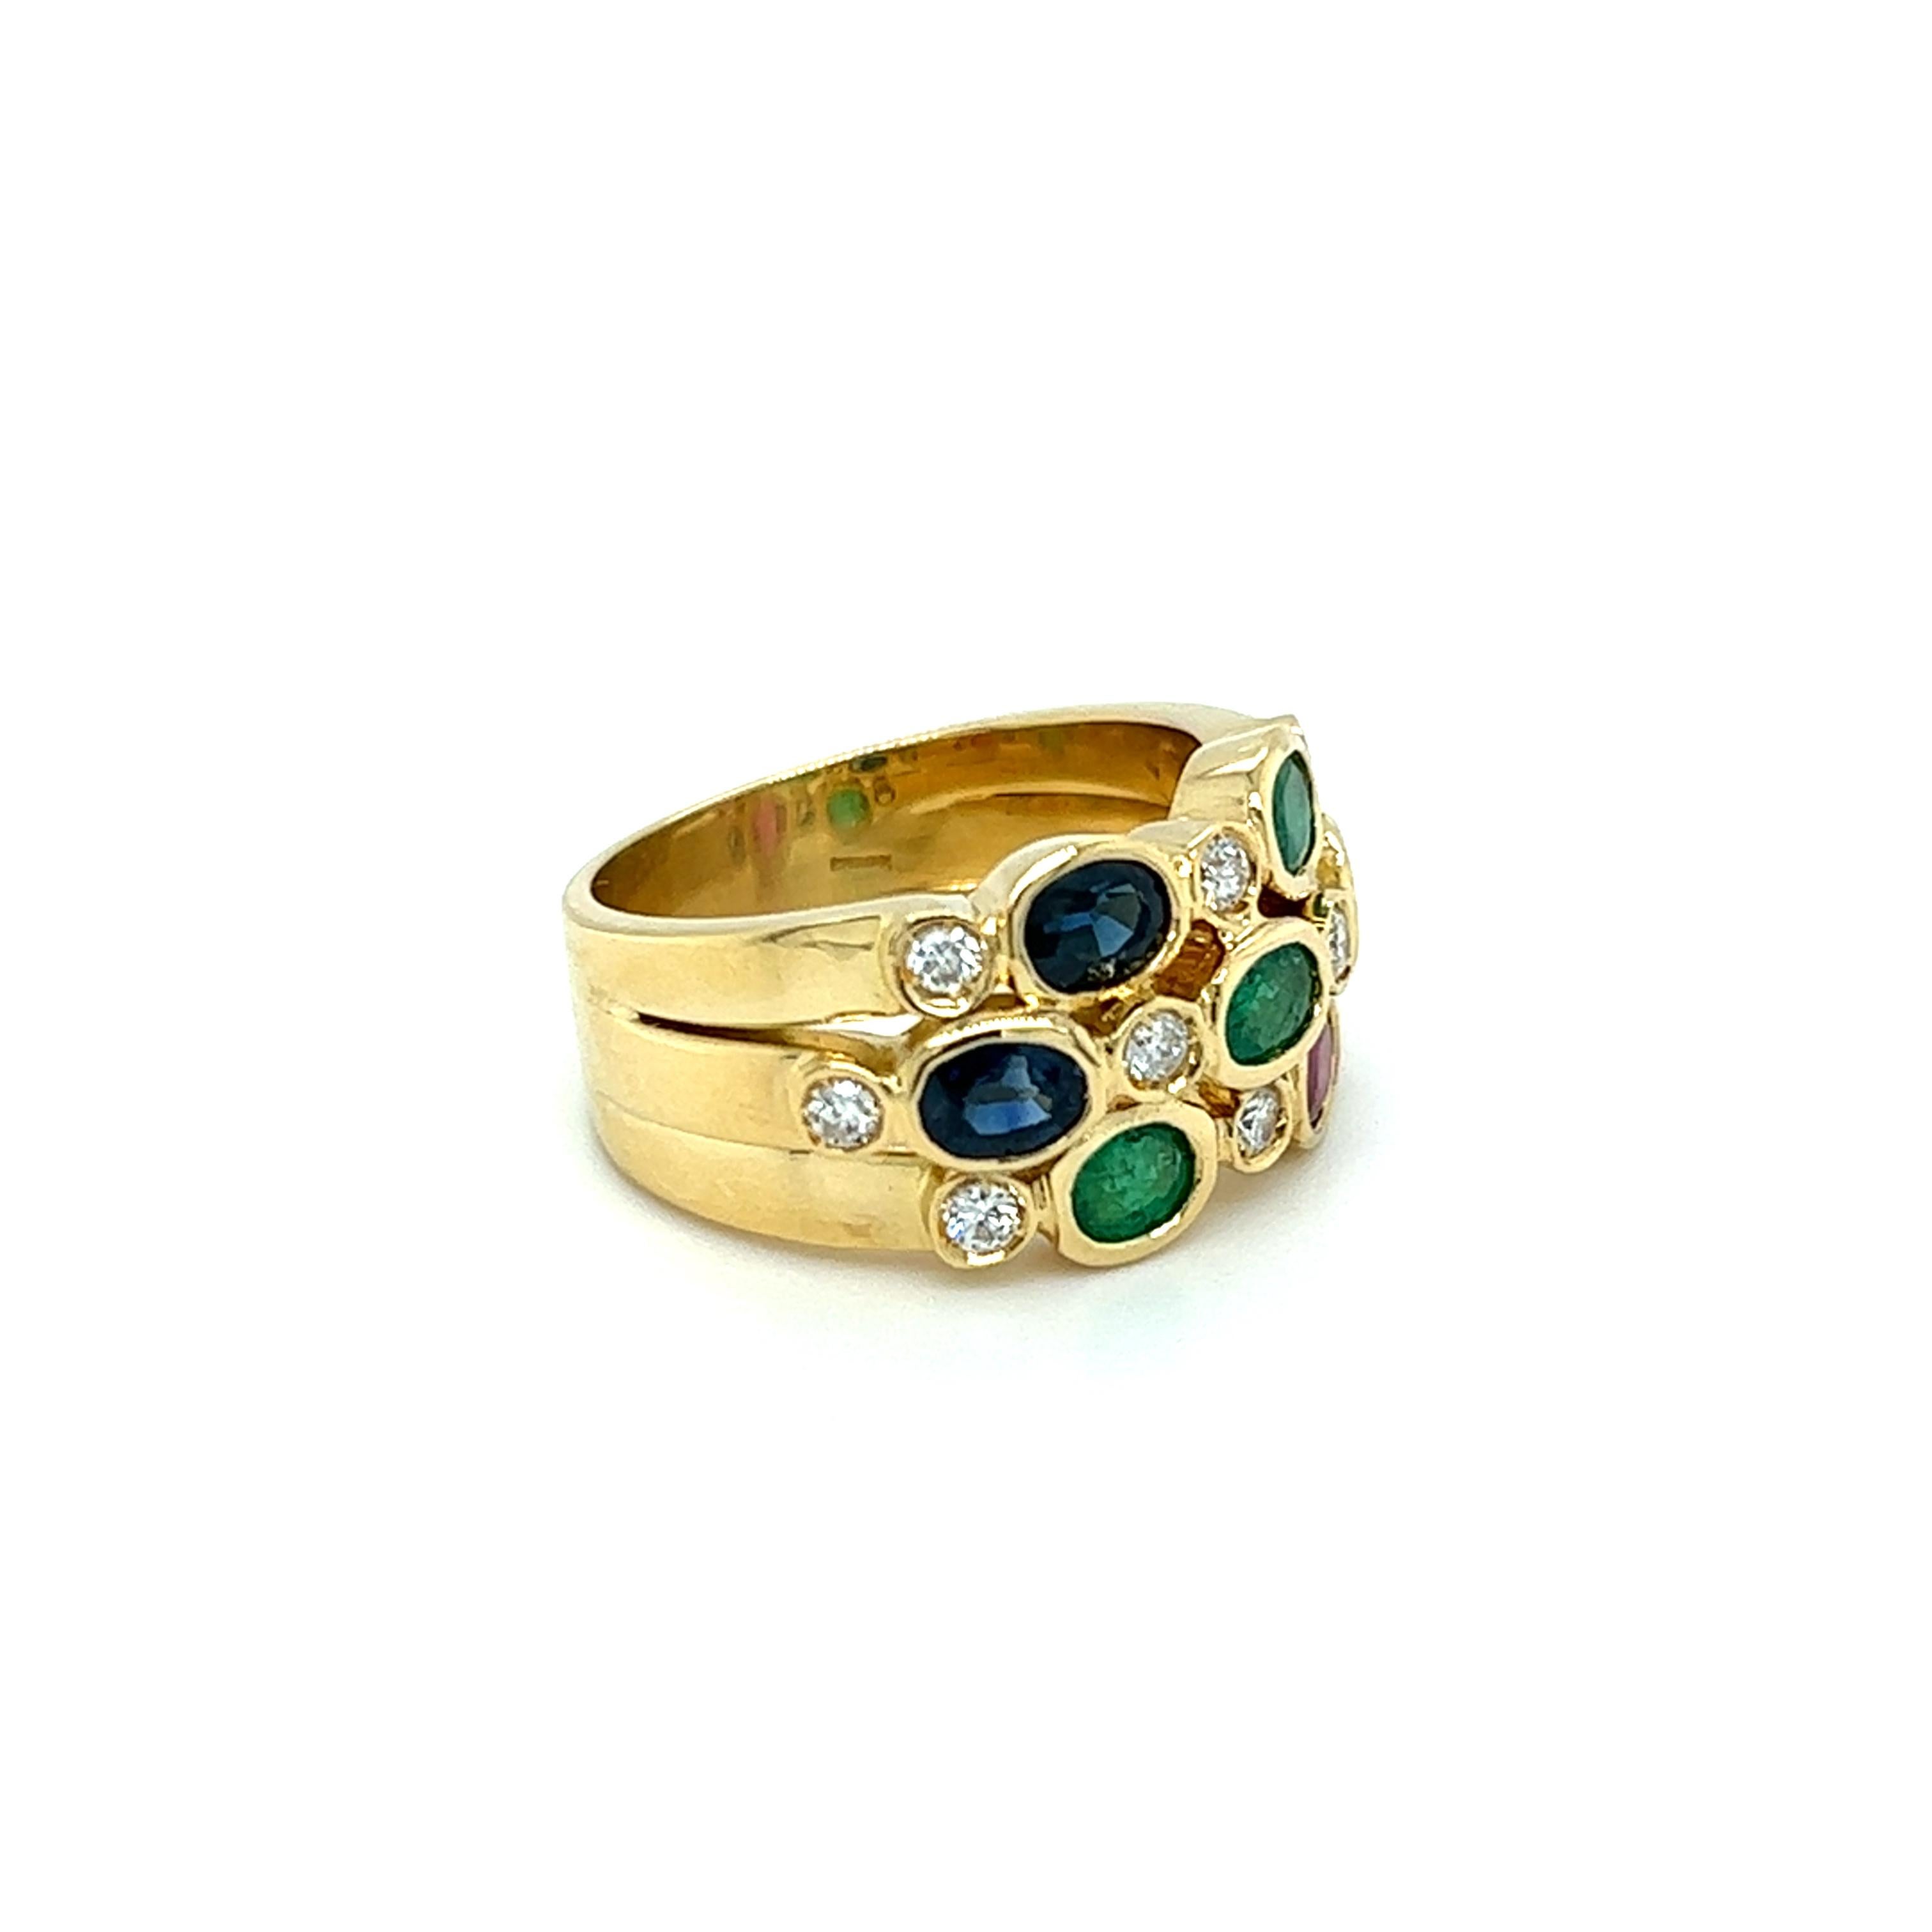 Contemporary Emerald, Sapphire, Ruby and Diamond Ring in 18K Gold